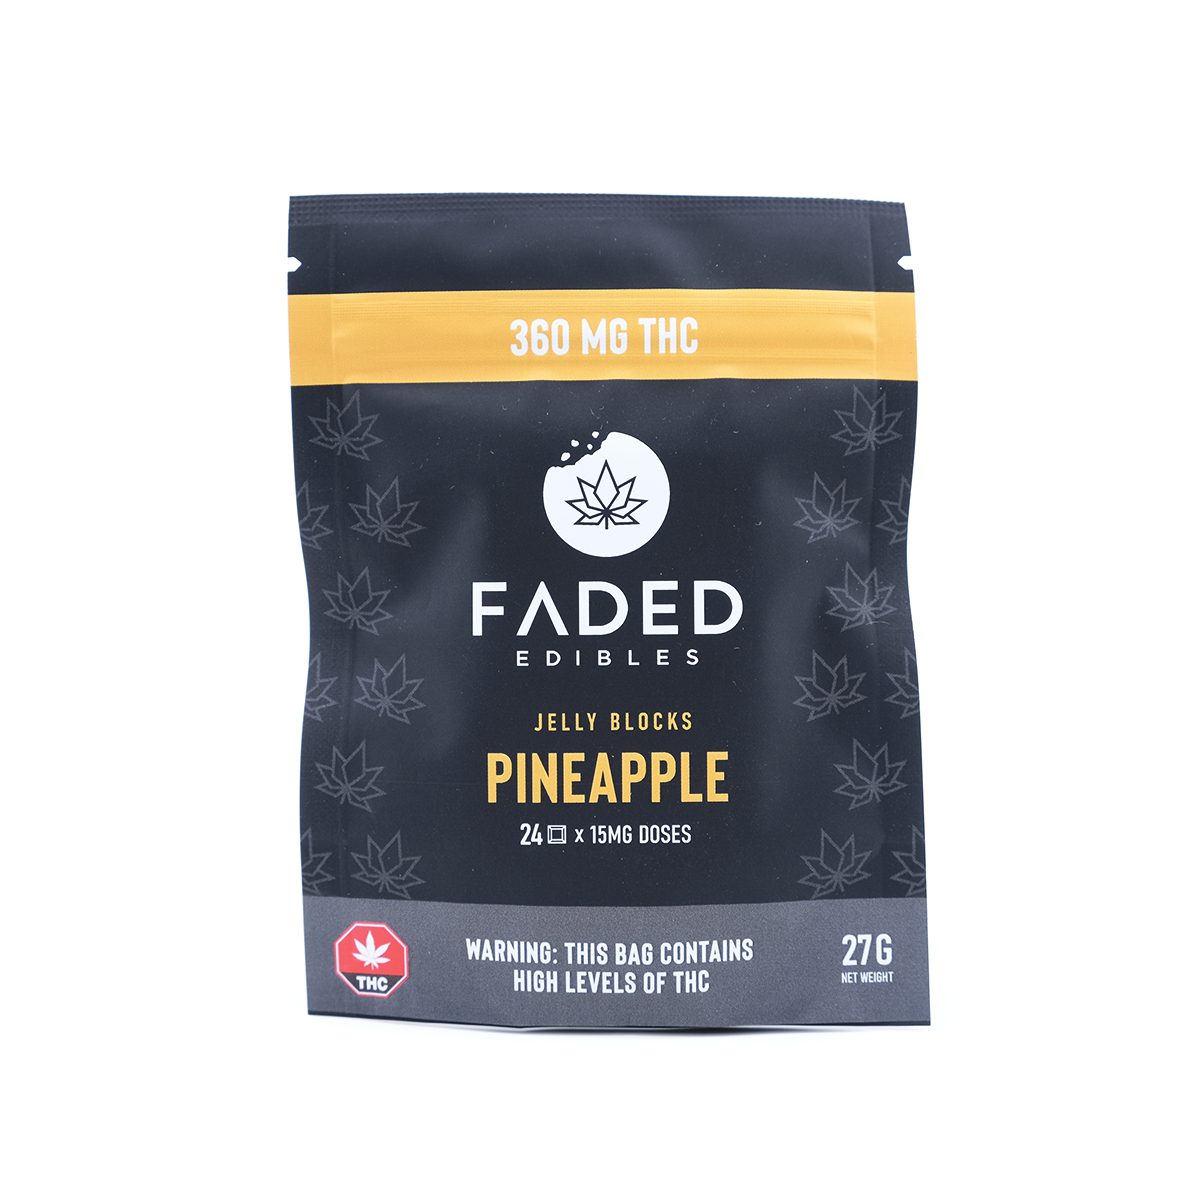 Pineaplle Jelly Blocks 360mg by Faded Edibles